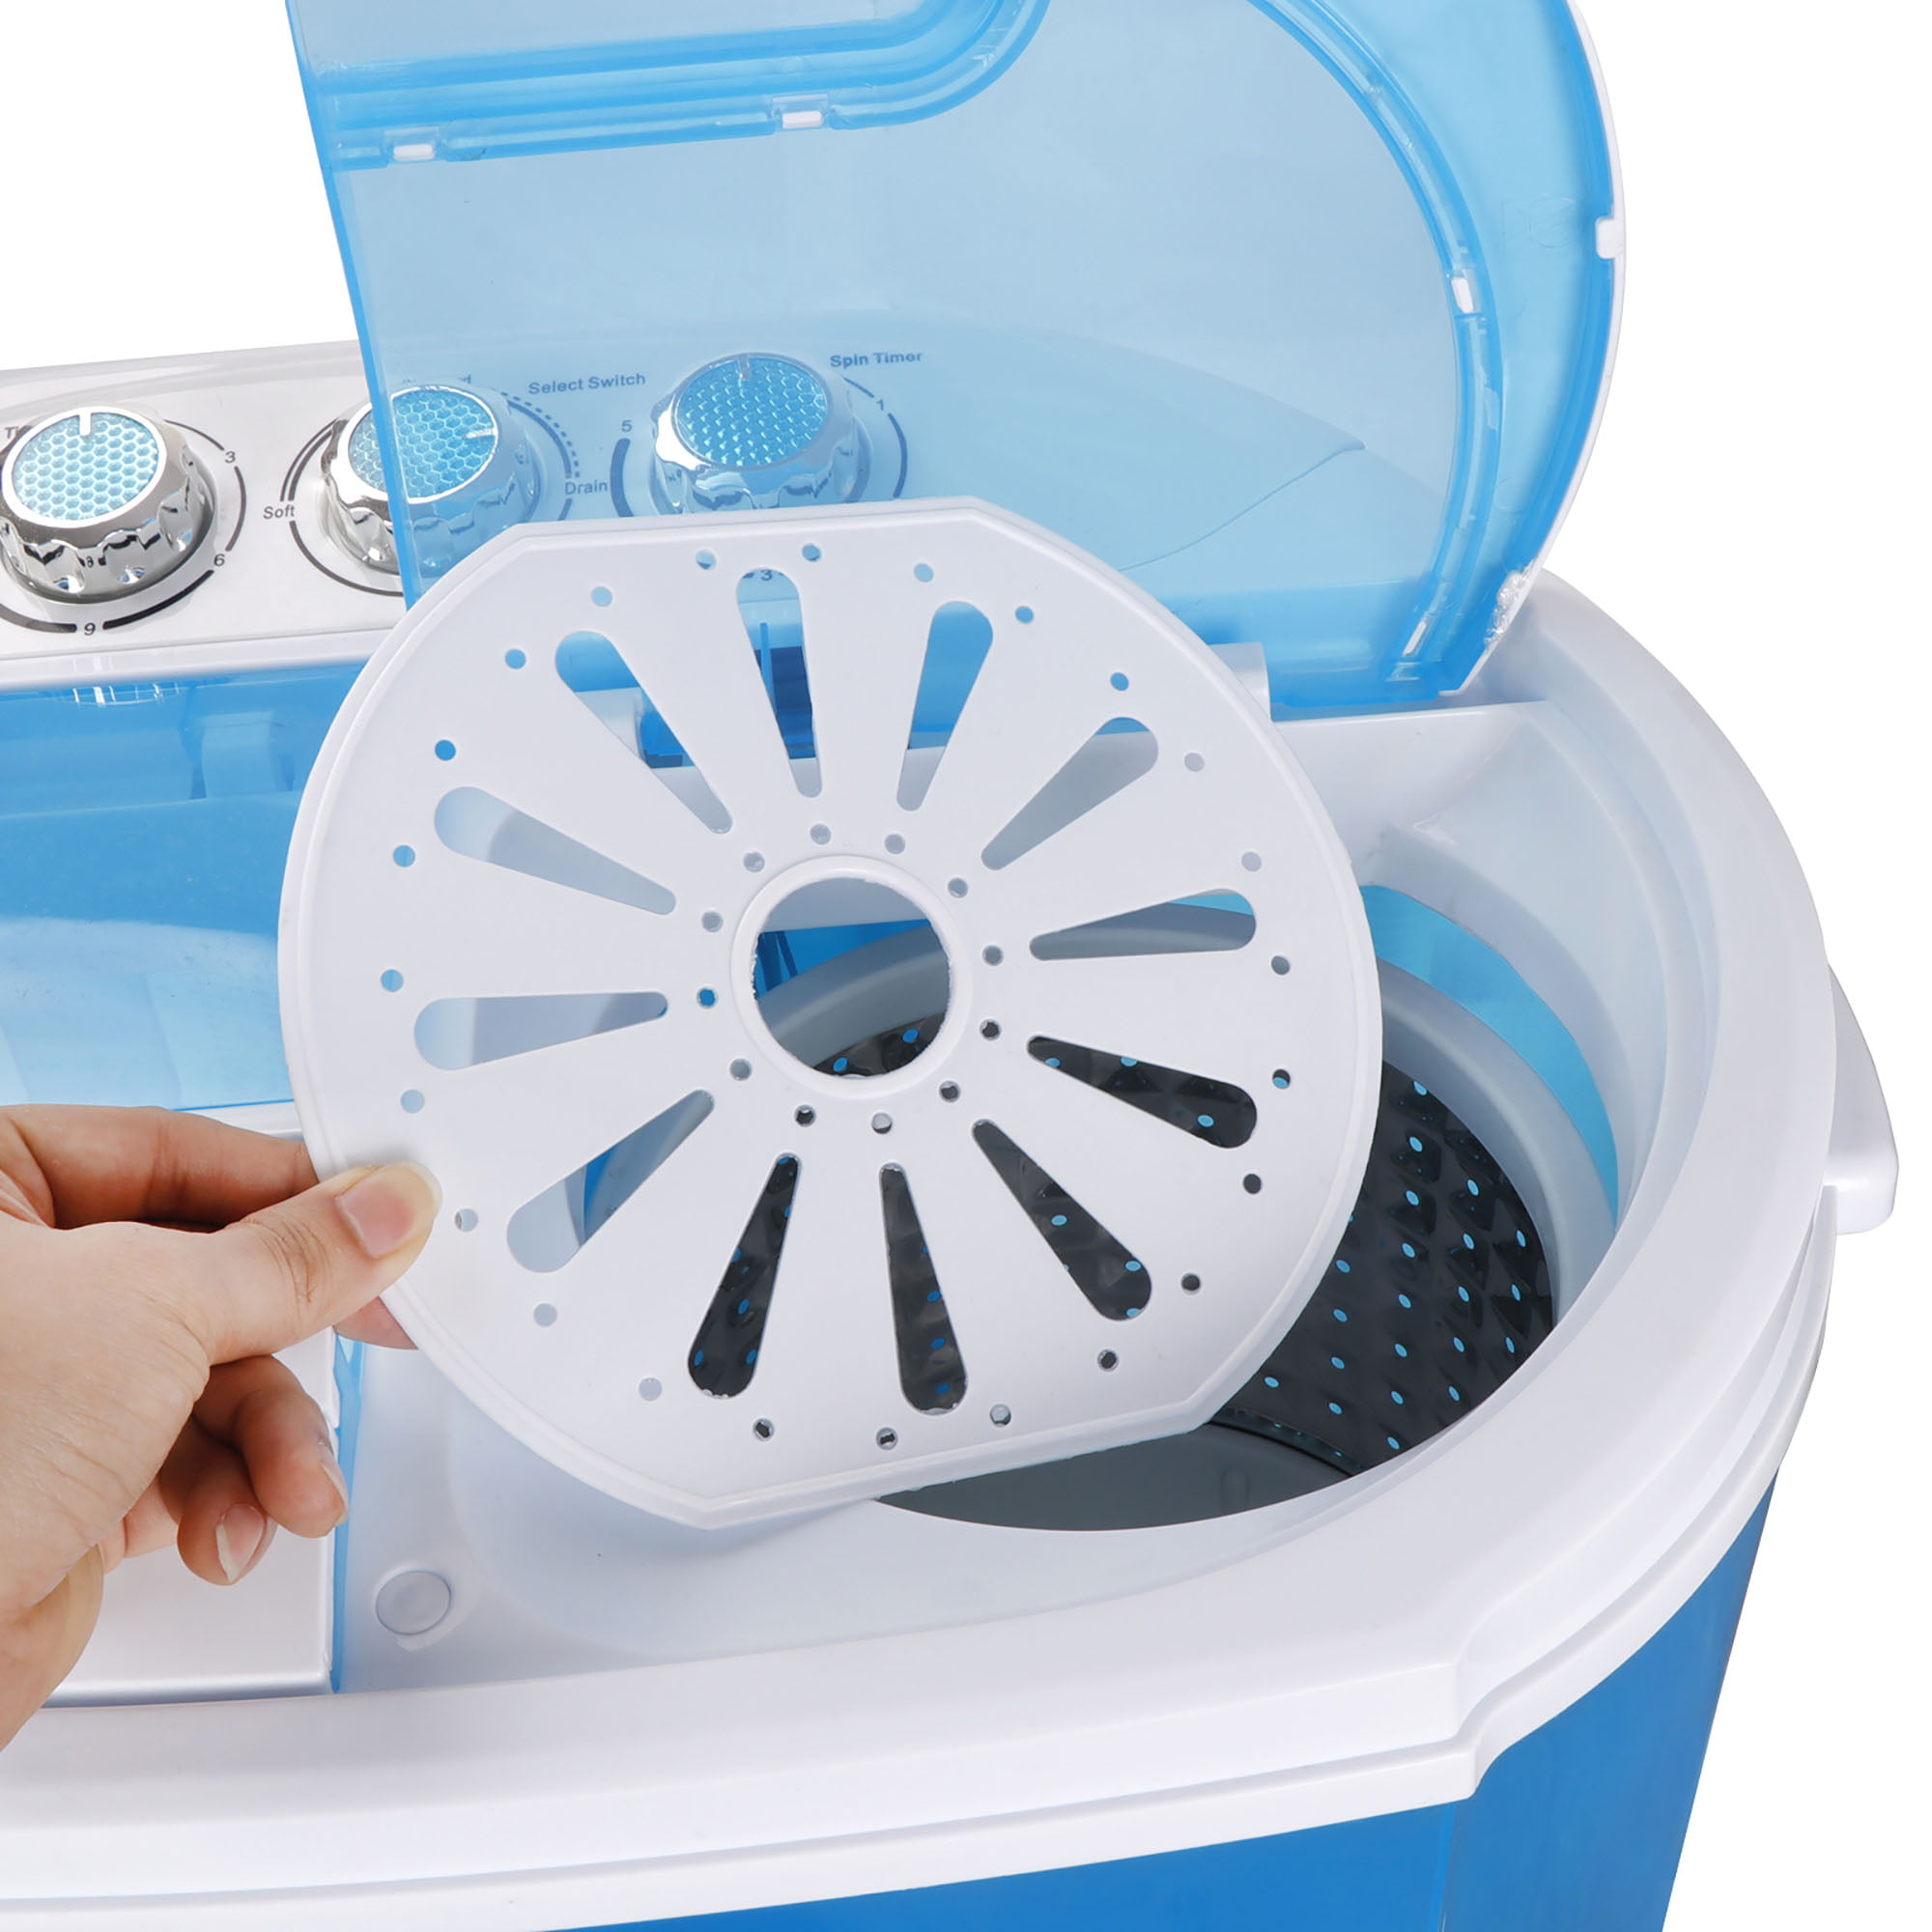 ZenStyle Portable Washer Review: I love with this teeny portable washing  machine